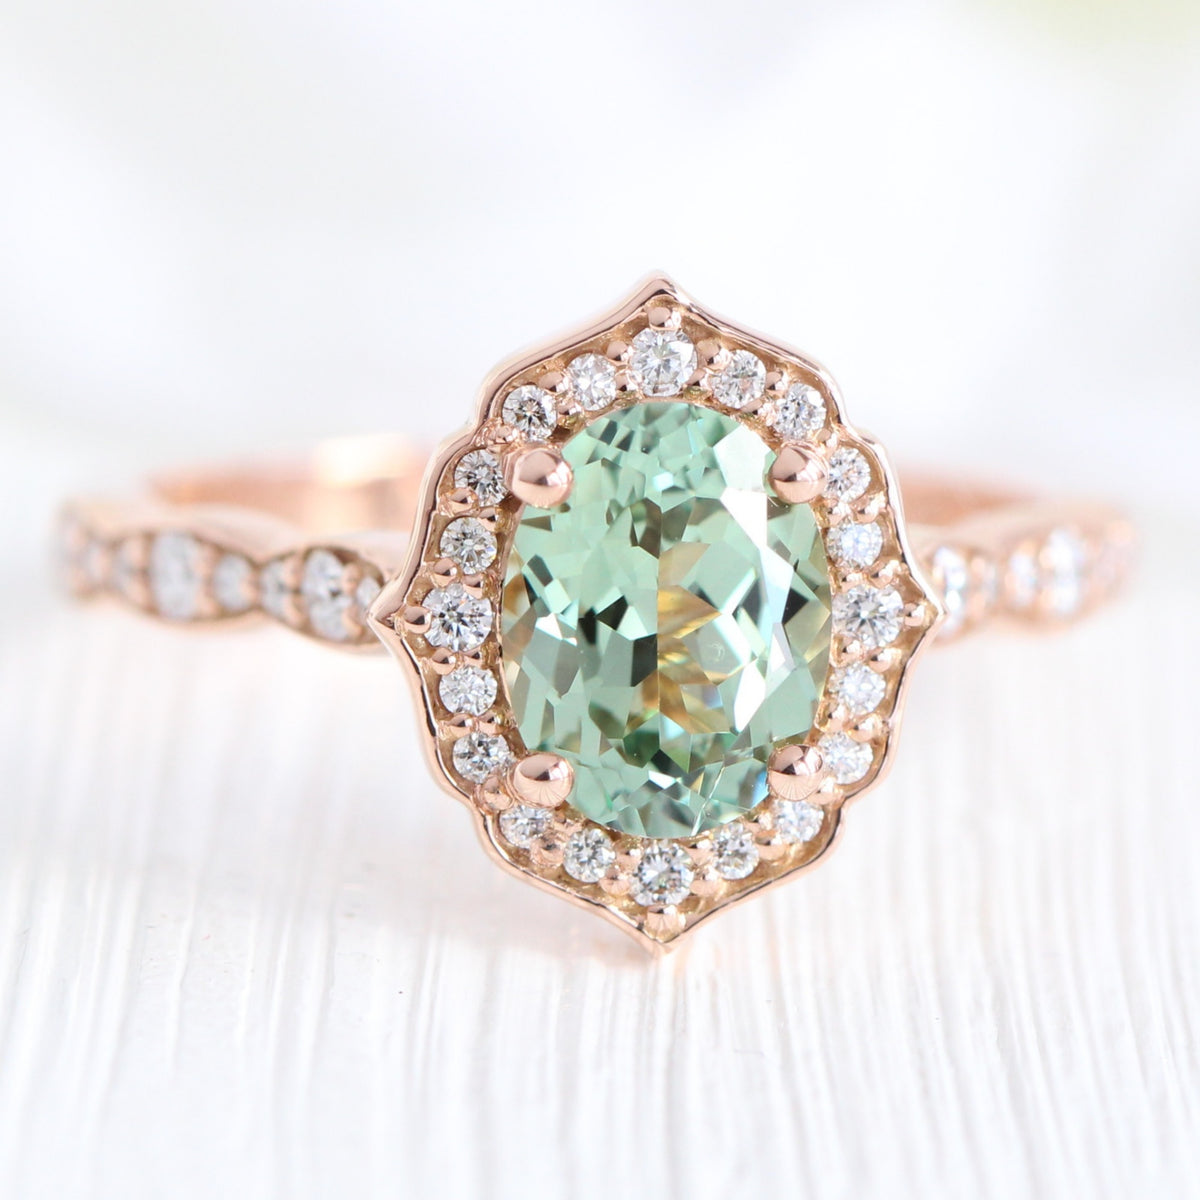 Oval green sapphire ring rose gold vintage halo diamond ring la more design jewelry